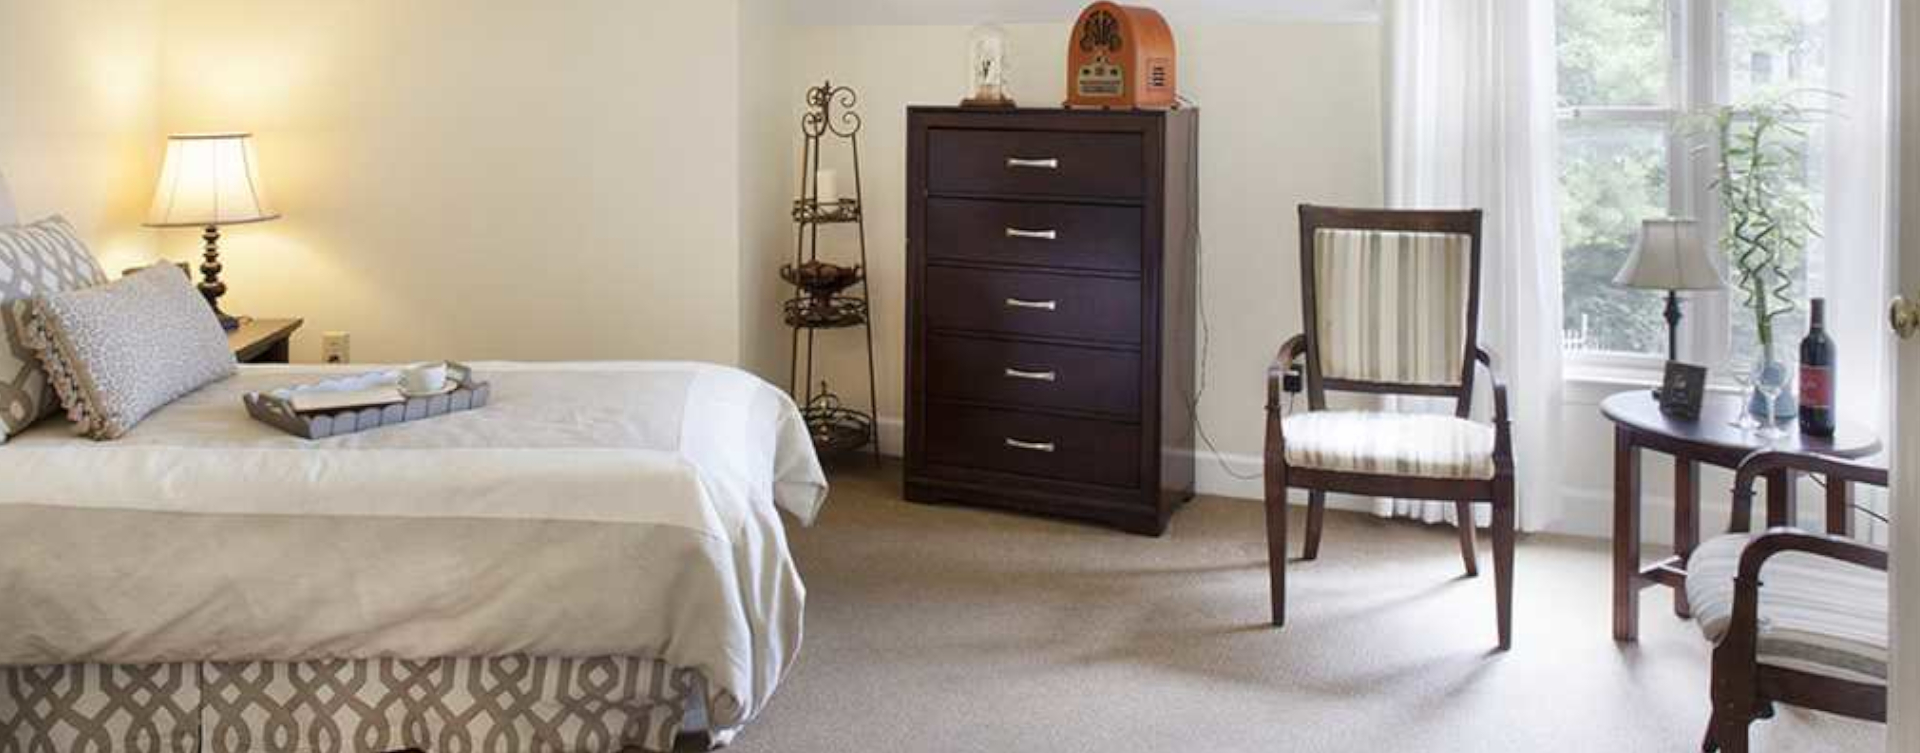 Get a new lease on life with a cozy apartment at Bickford of Upper Arlington